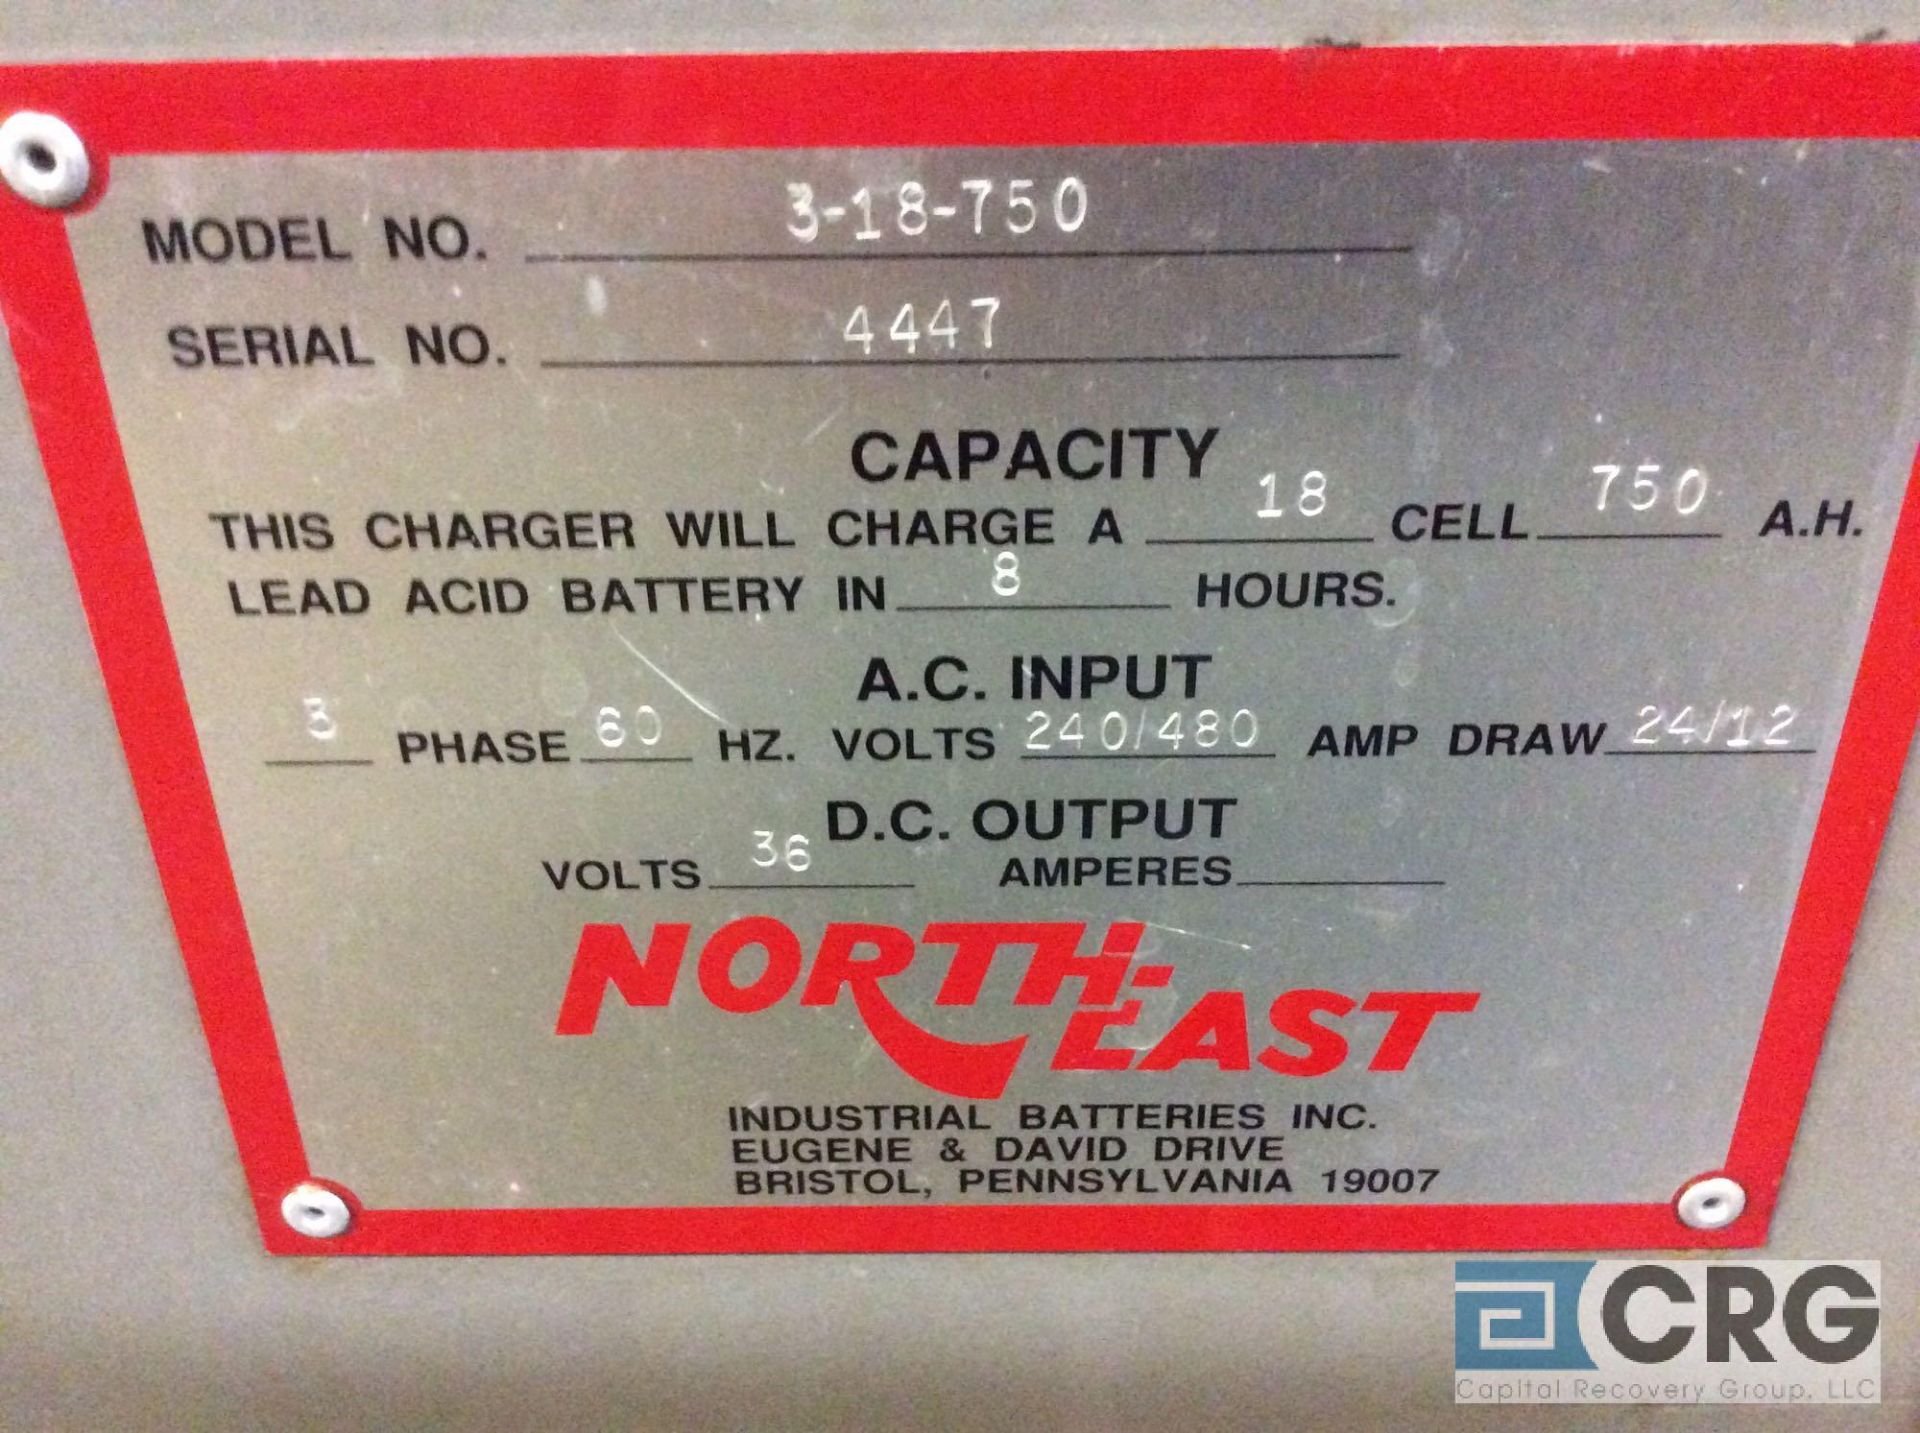 Northeast 36 volt battery charger, model 3-18-750, serial 4447, - Image 3 of 3